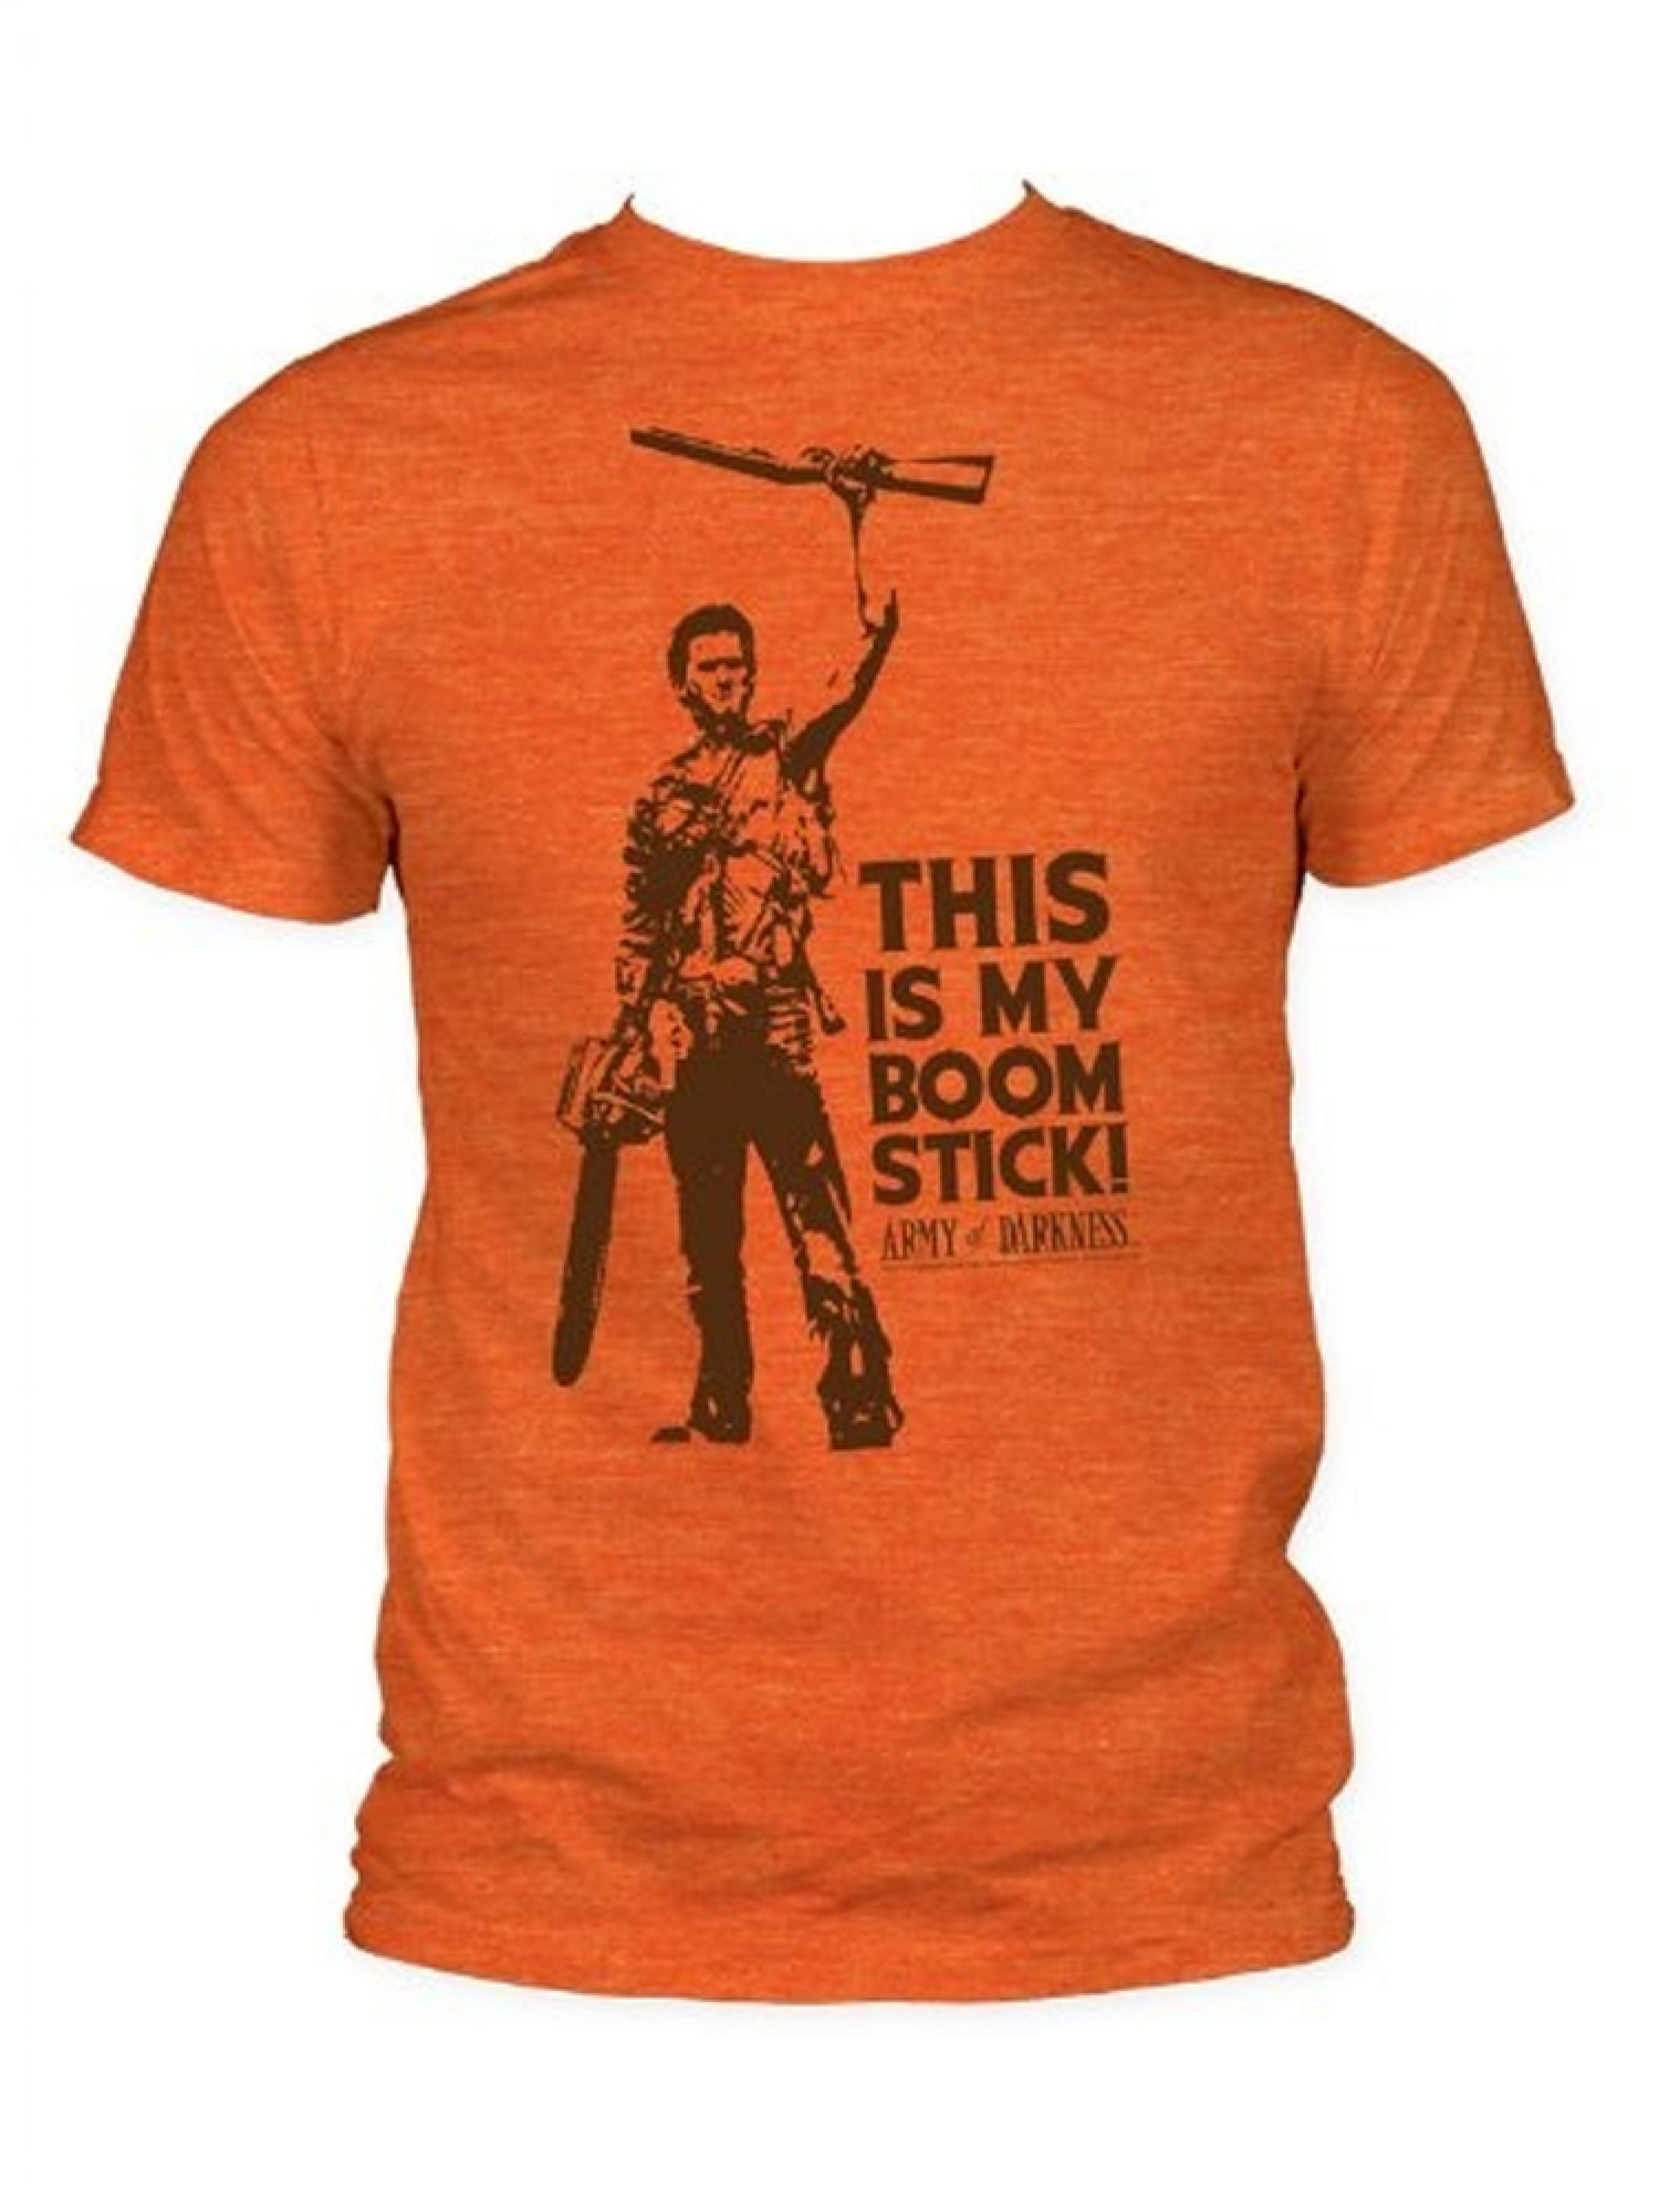 army of darkness t shirt